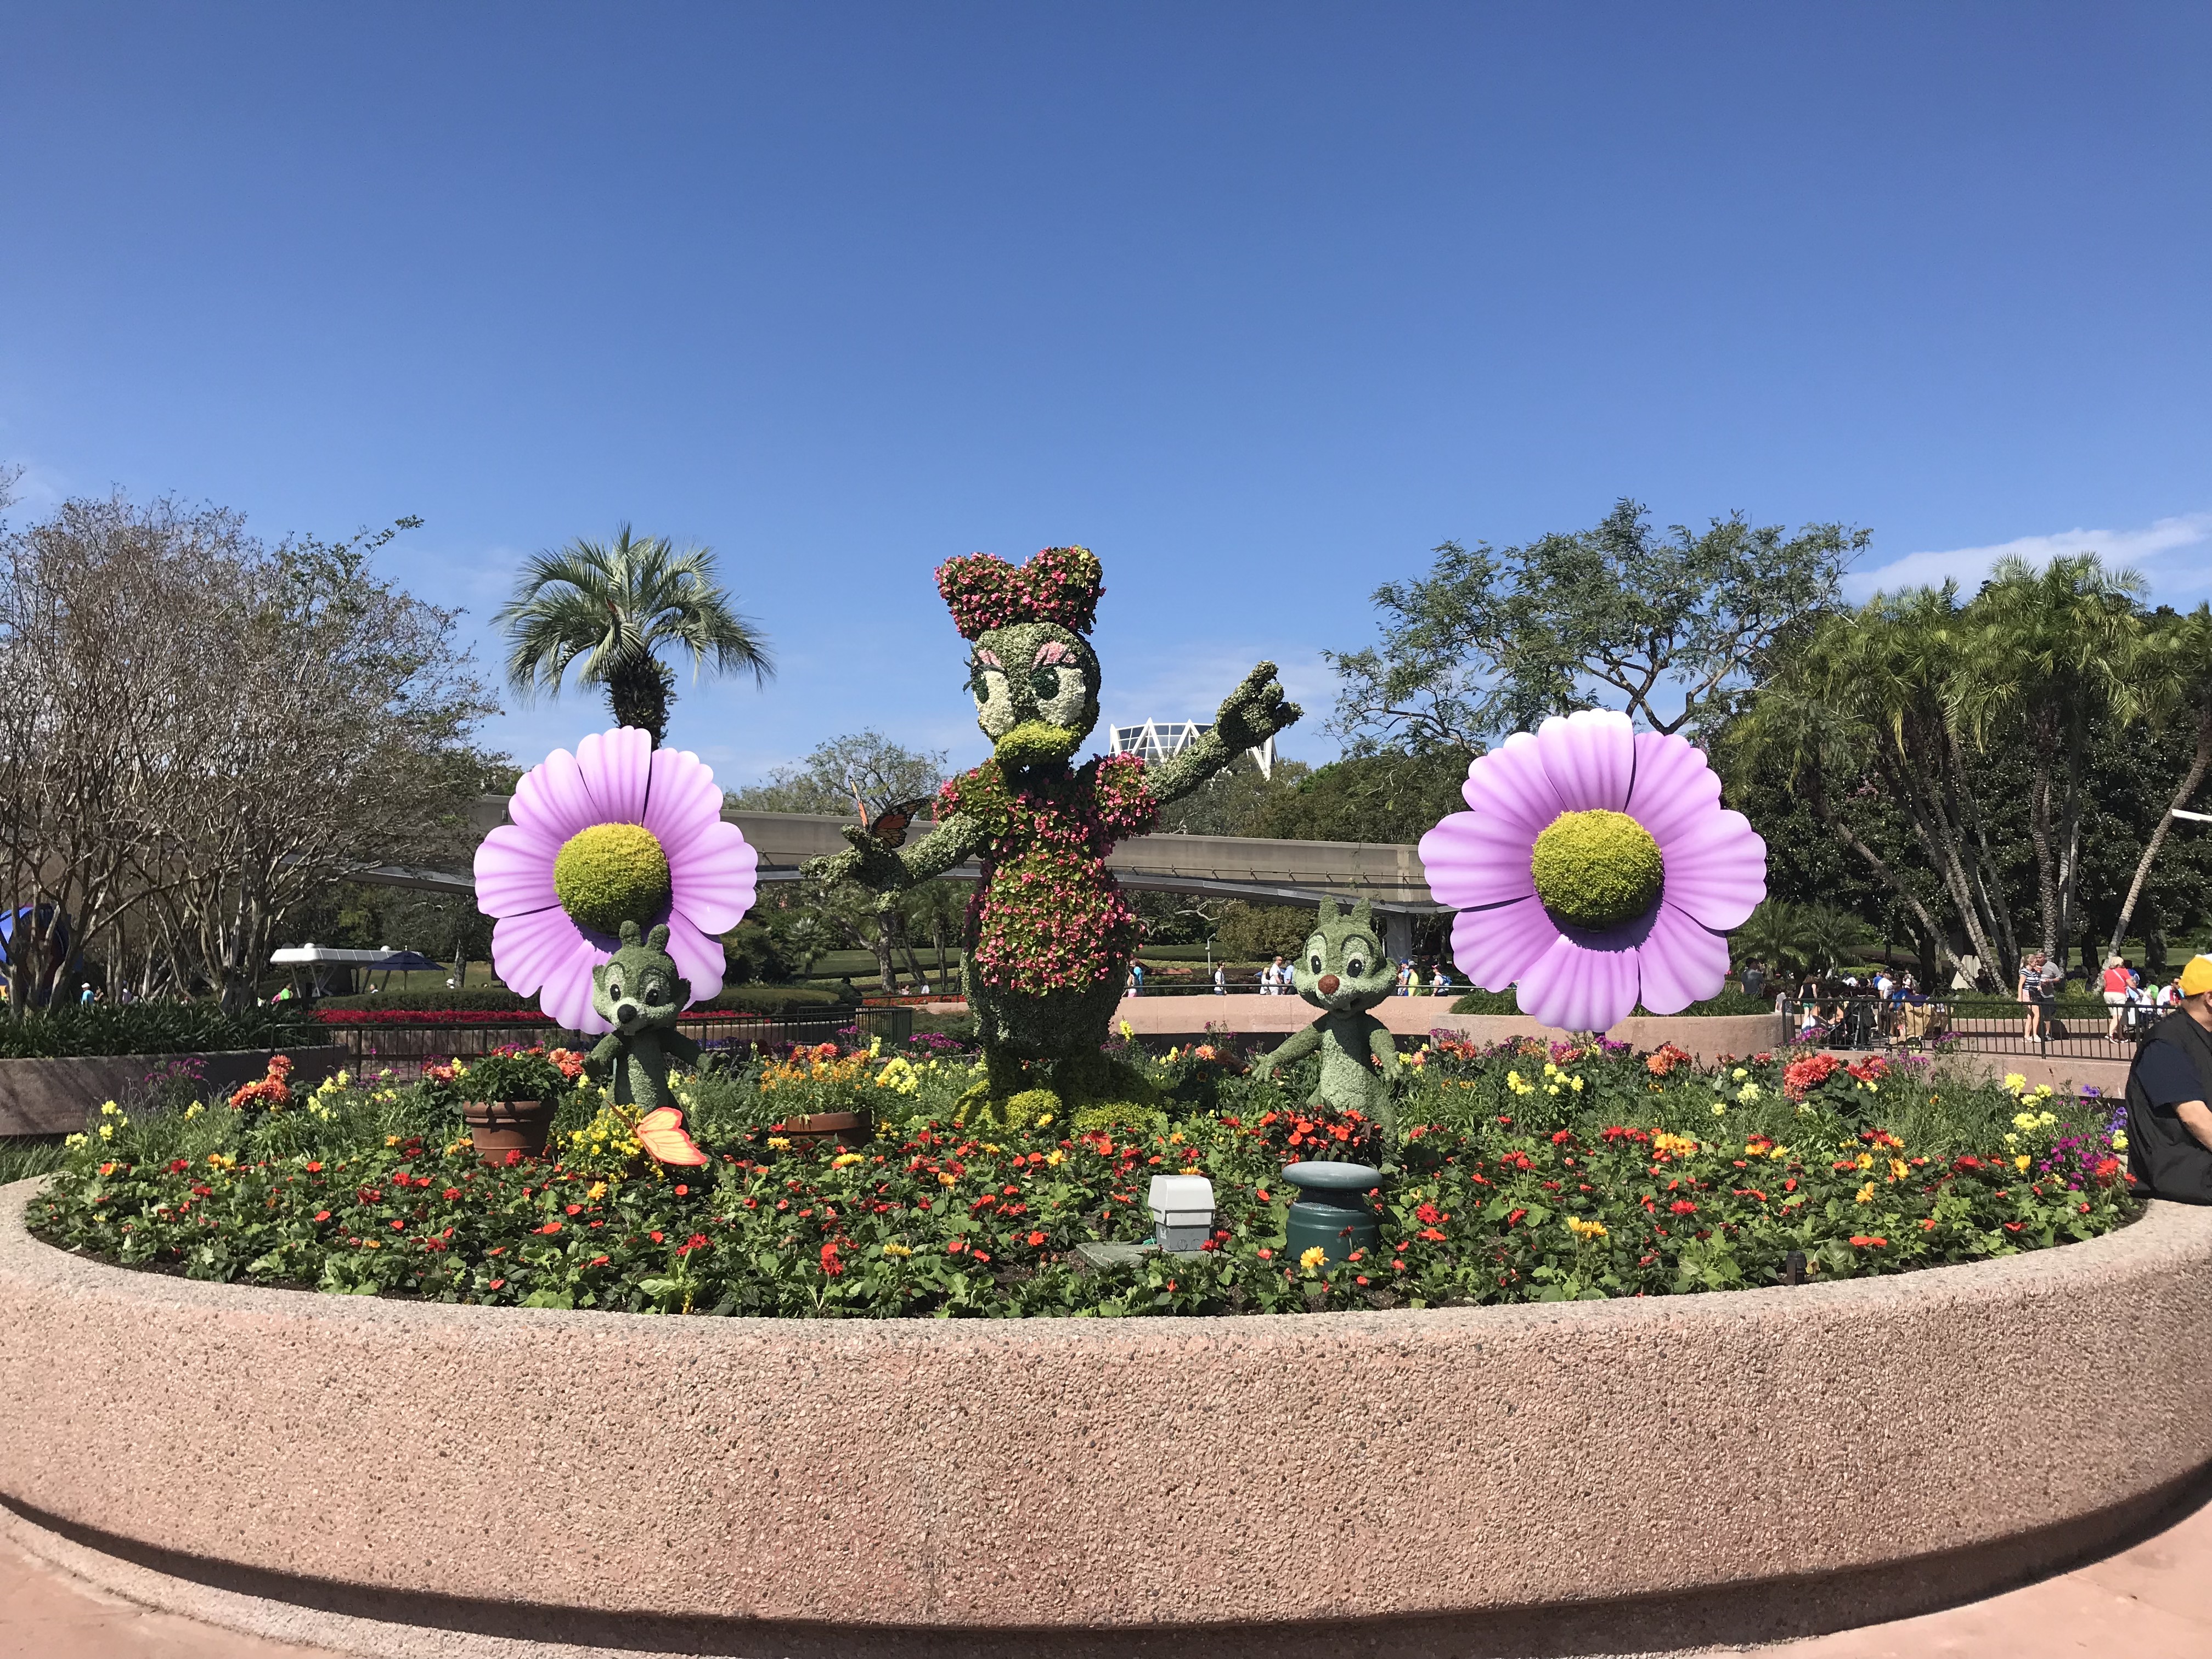 Daisy Duck at Epcot's 2018 Flower and Garden Festival